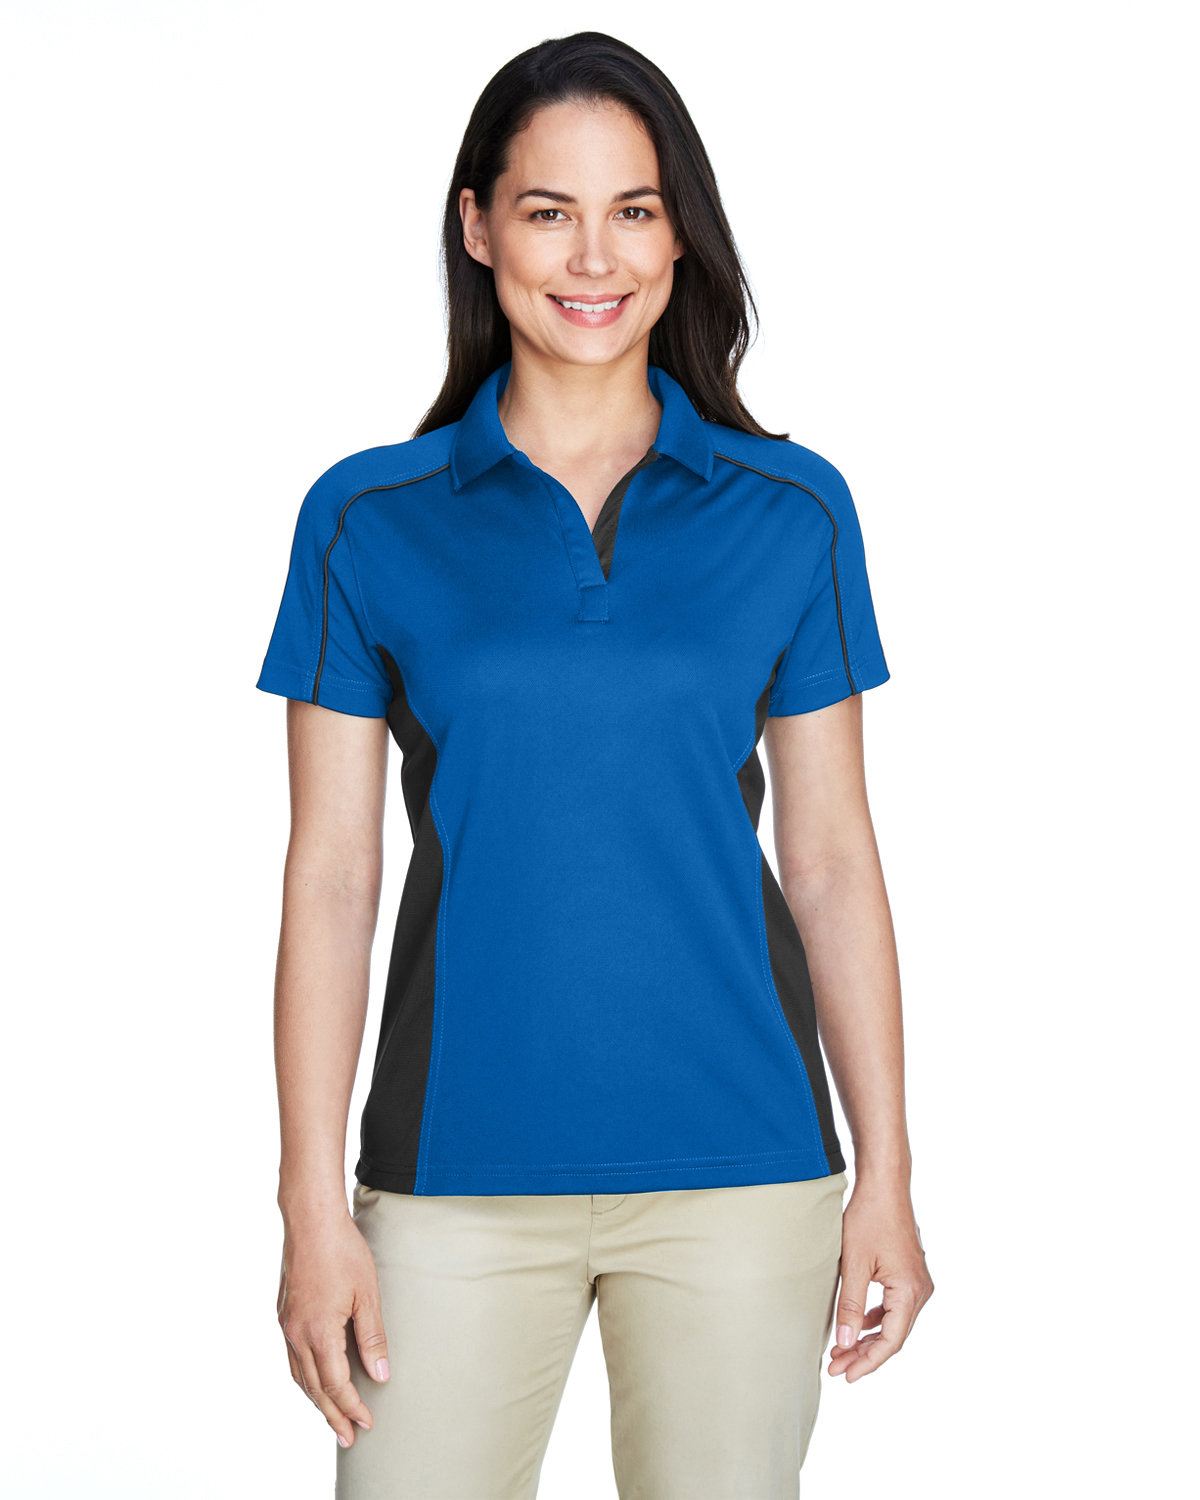 Extreme Ladies' Eperformance™ Fuse Snag Protection Plus Colorblock Polo TRUE ROYAL/ BLK 